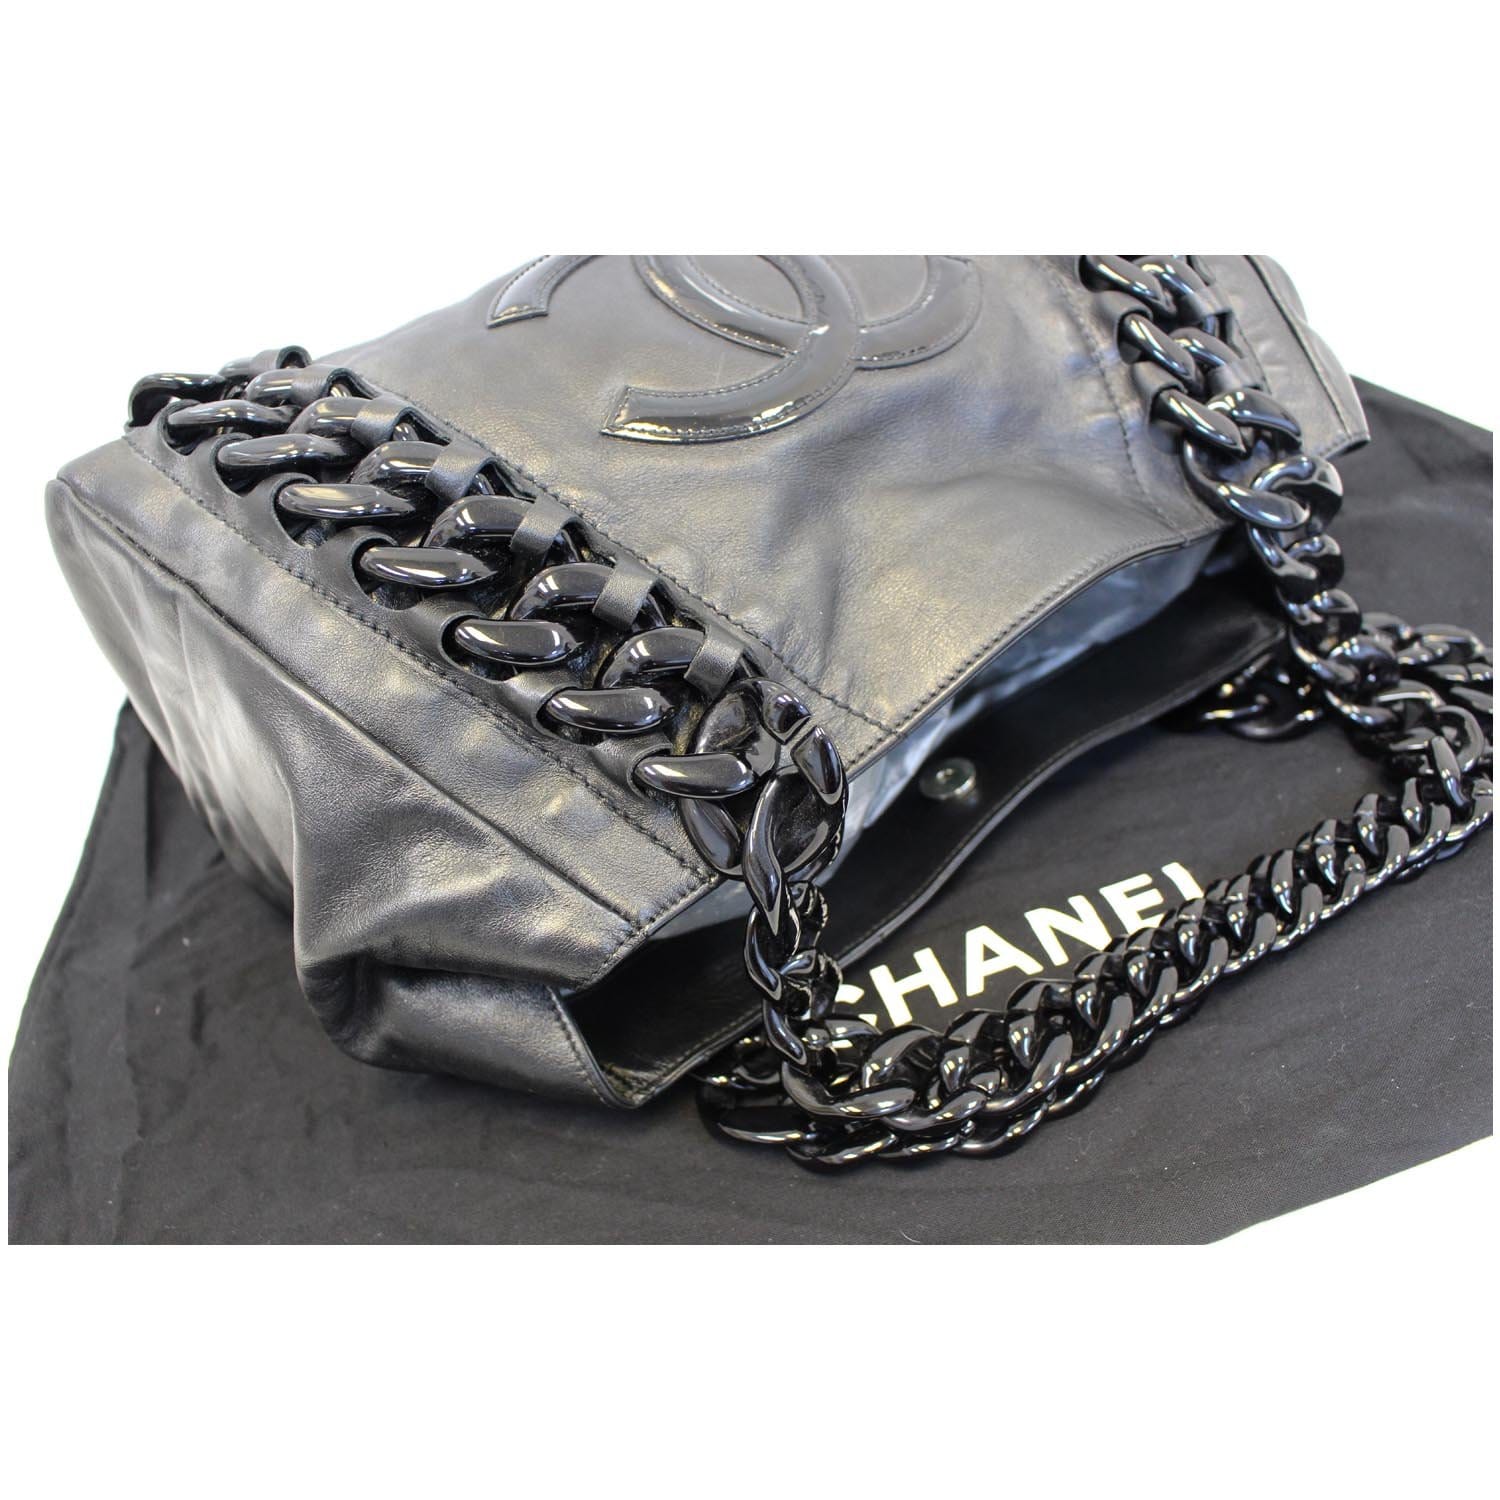 Chanel Dark Brown Caviar Leather Modern Chain East/West Tote